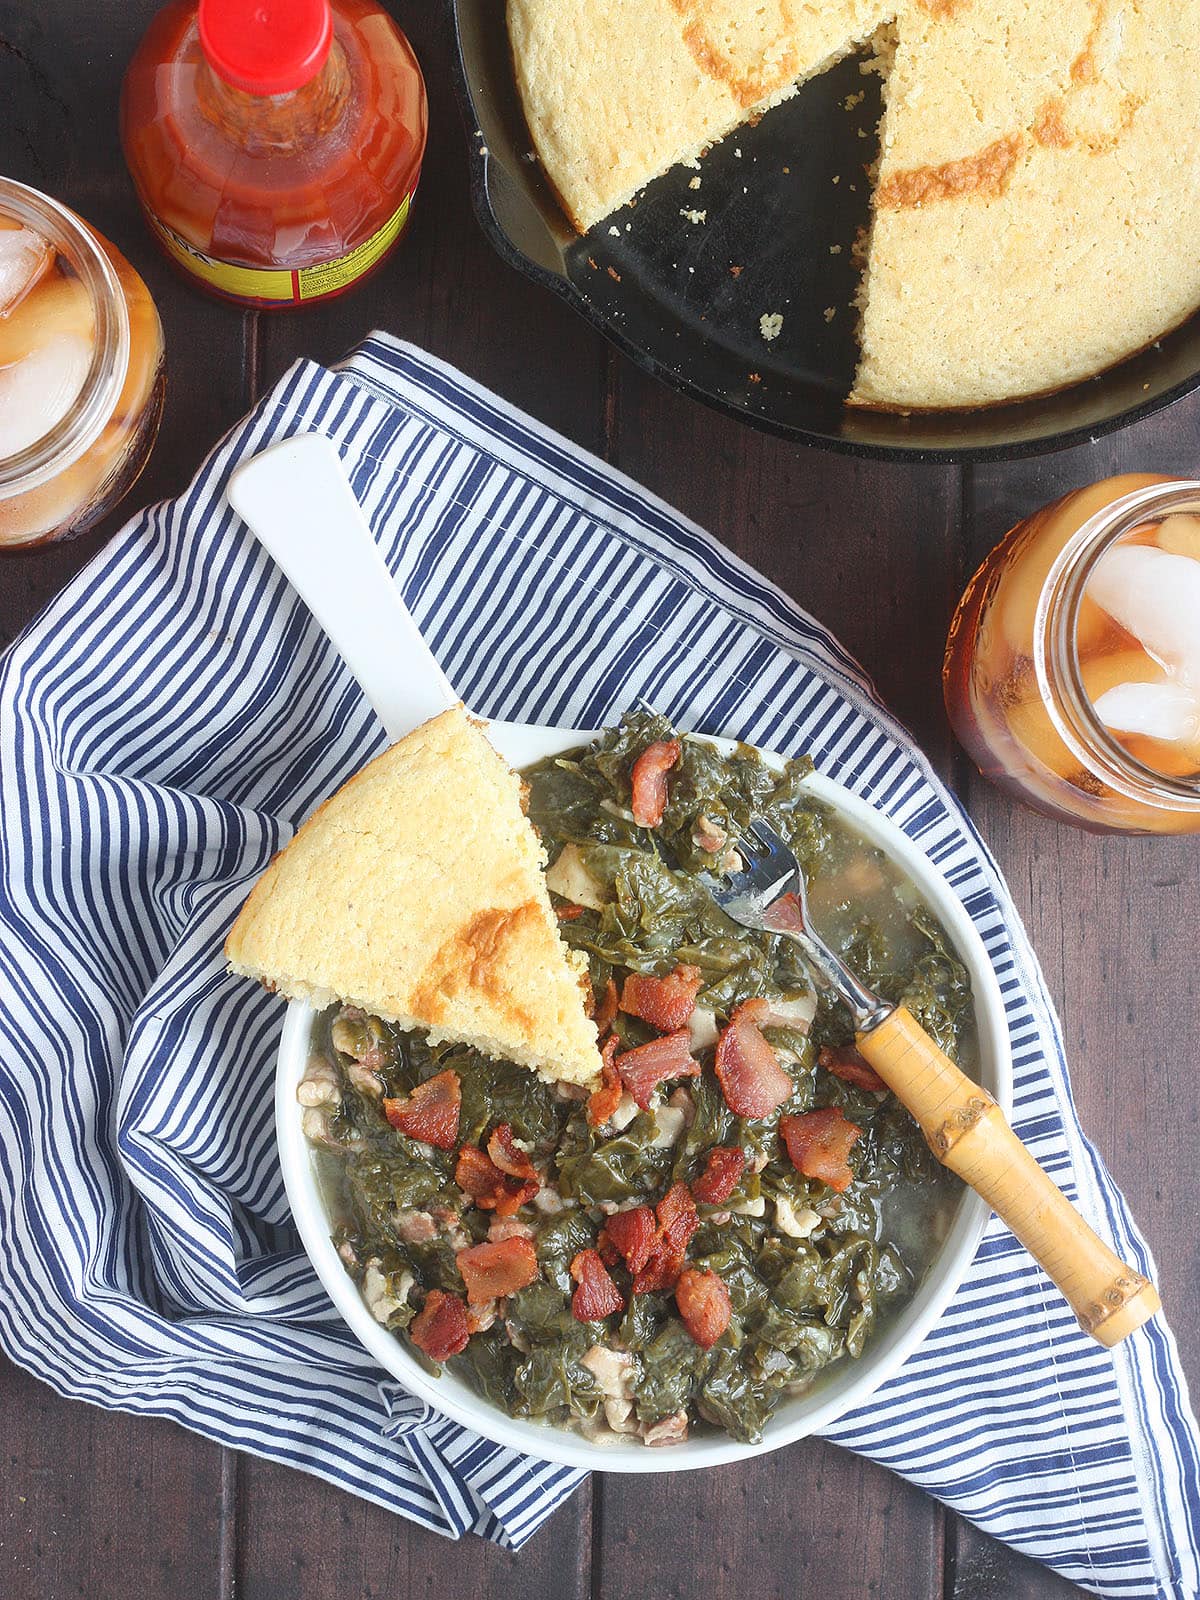 Turnip greens in a white bowl with a wedge of cornbread on the side.